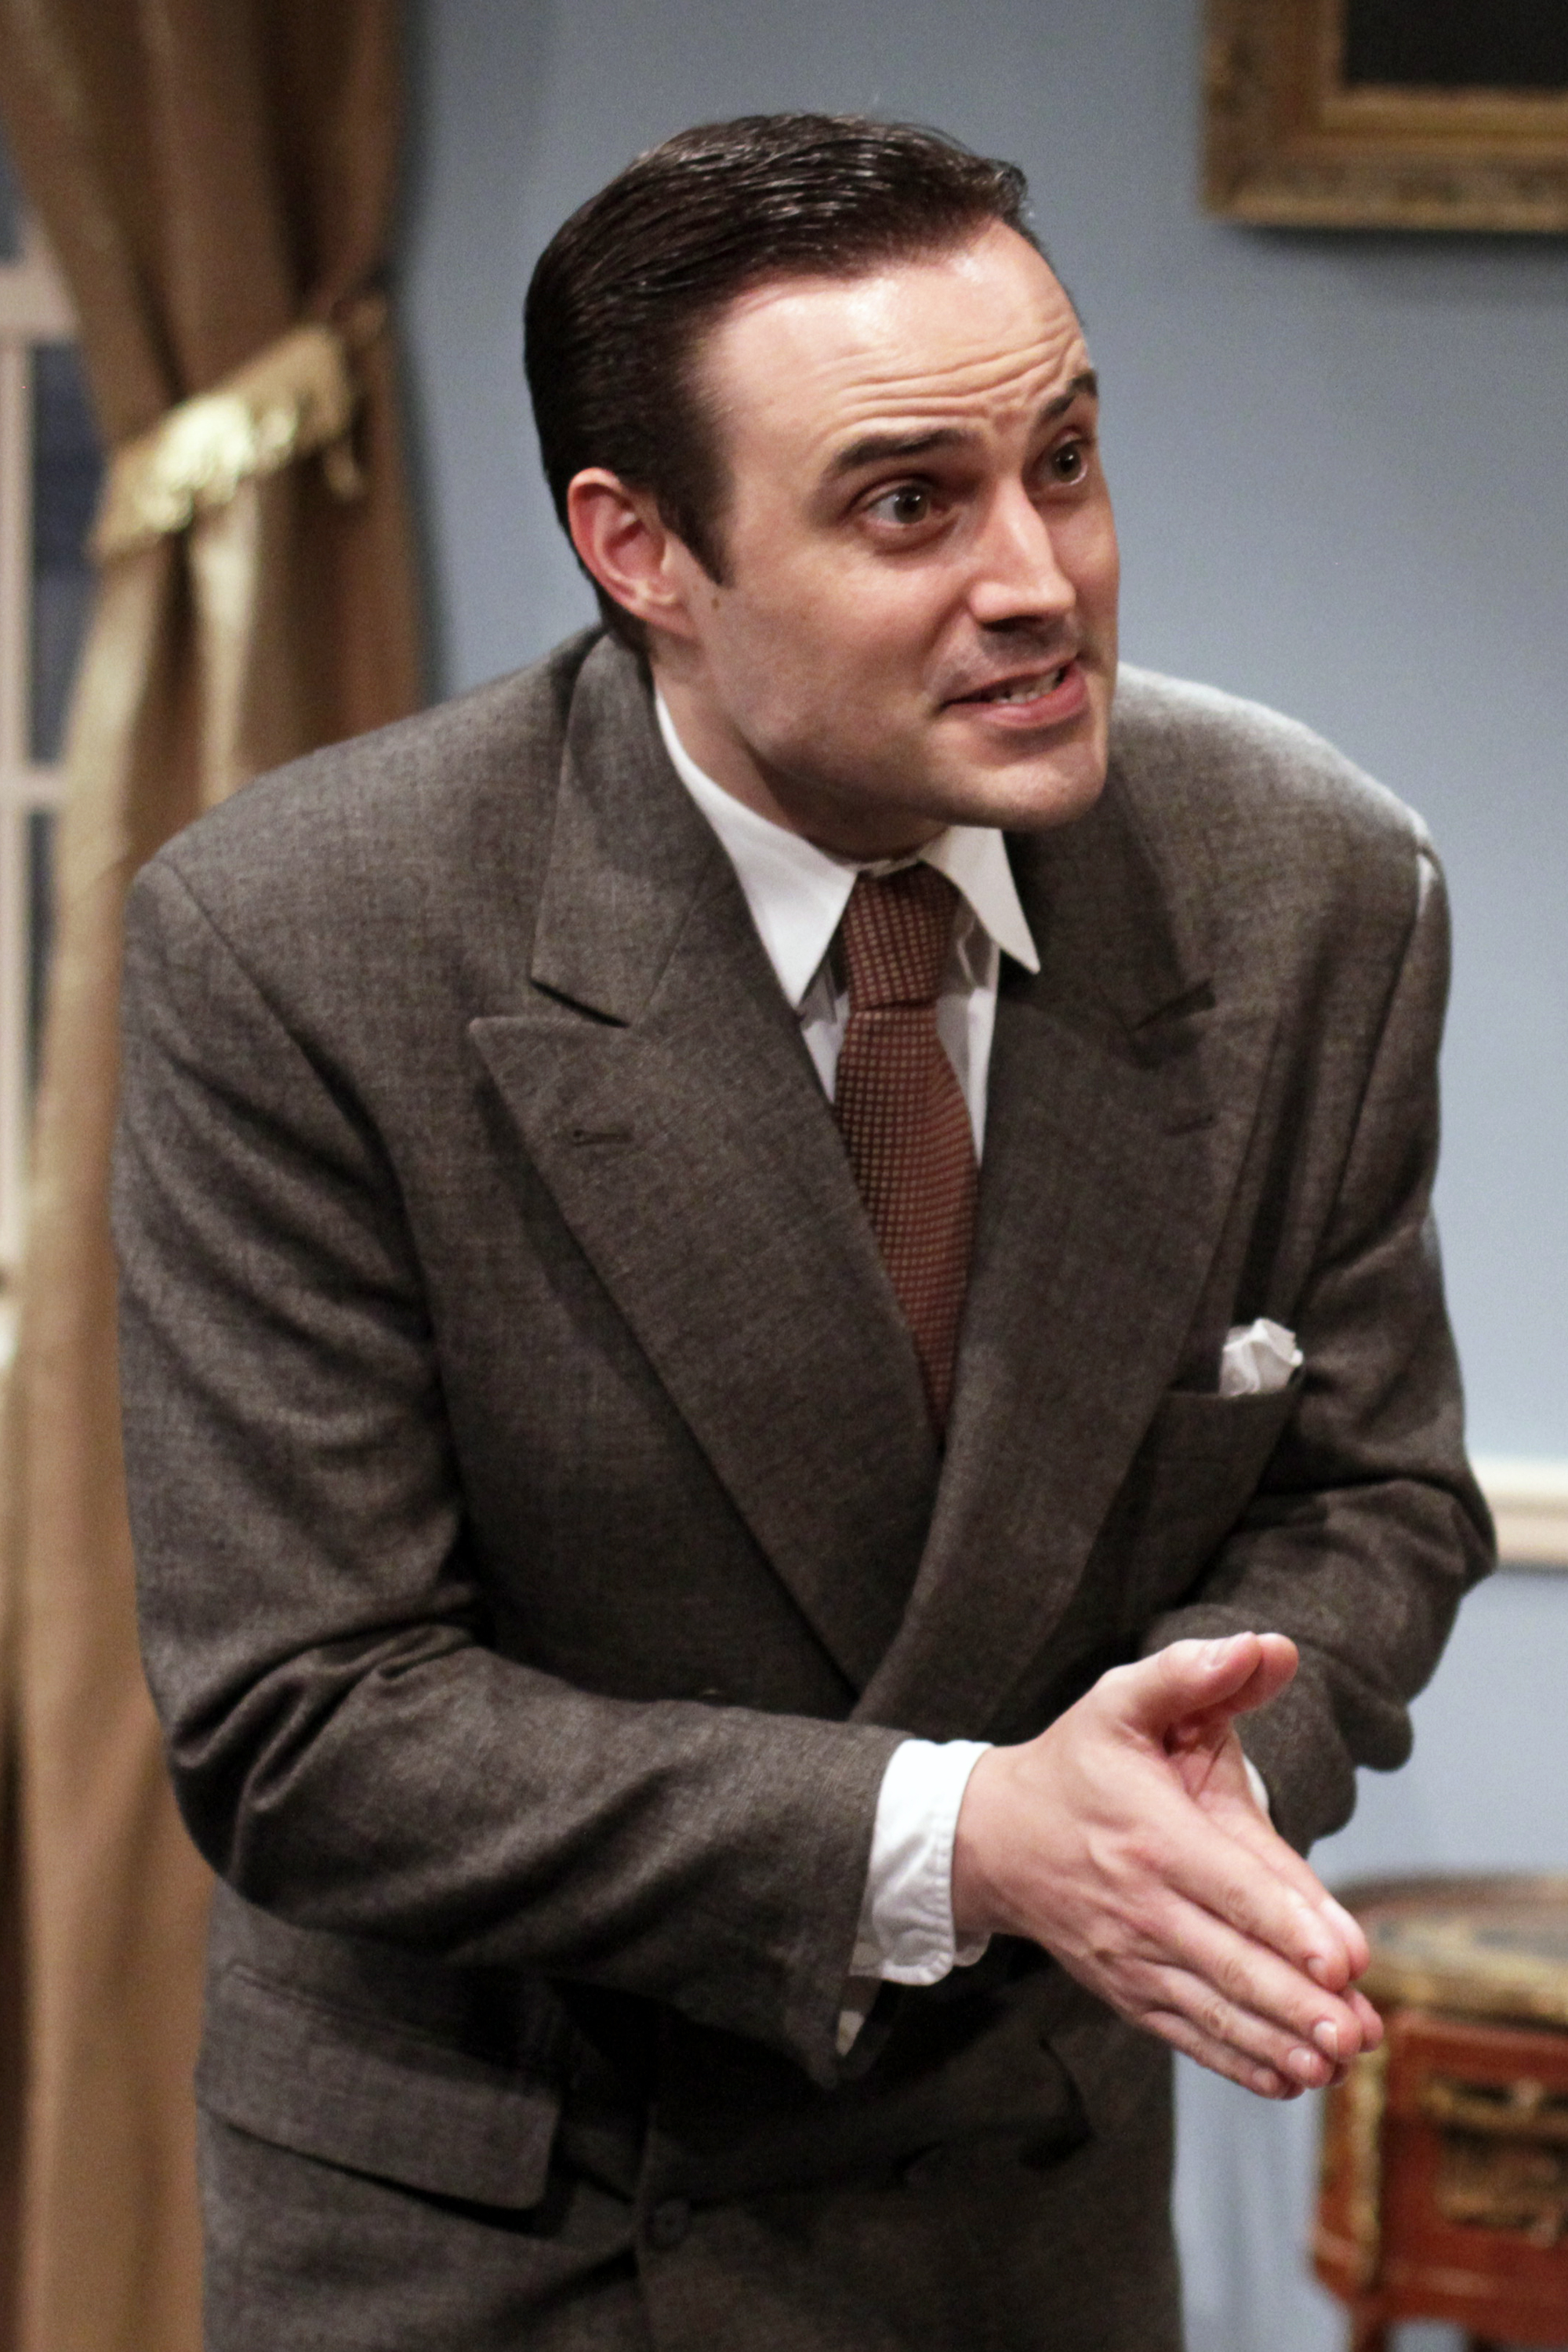 As Eddie Wister in BOTH YOUR HOUSES at the METROPOLITAN PLAYHOUSE in New York